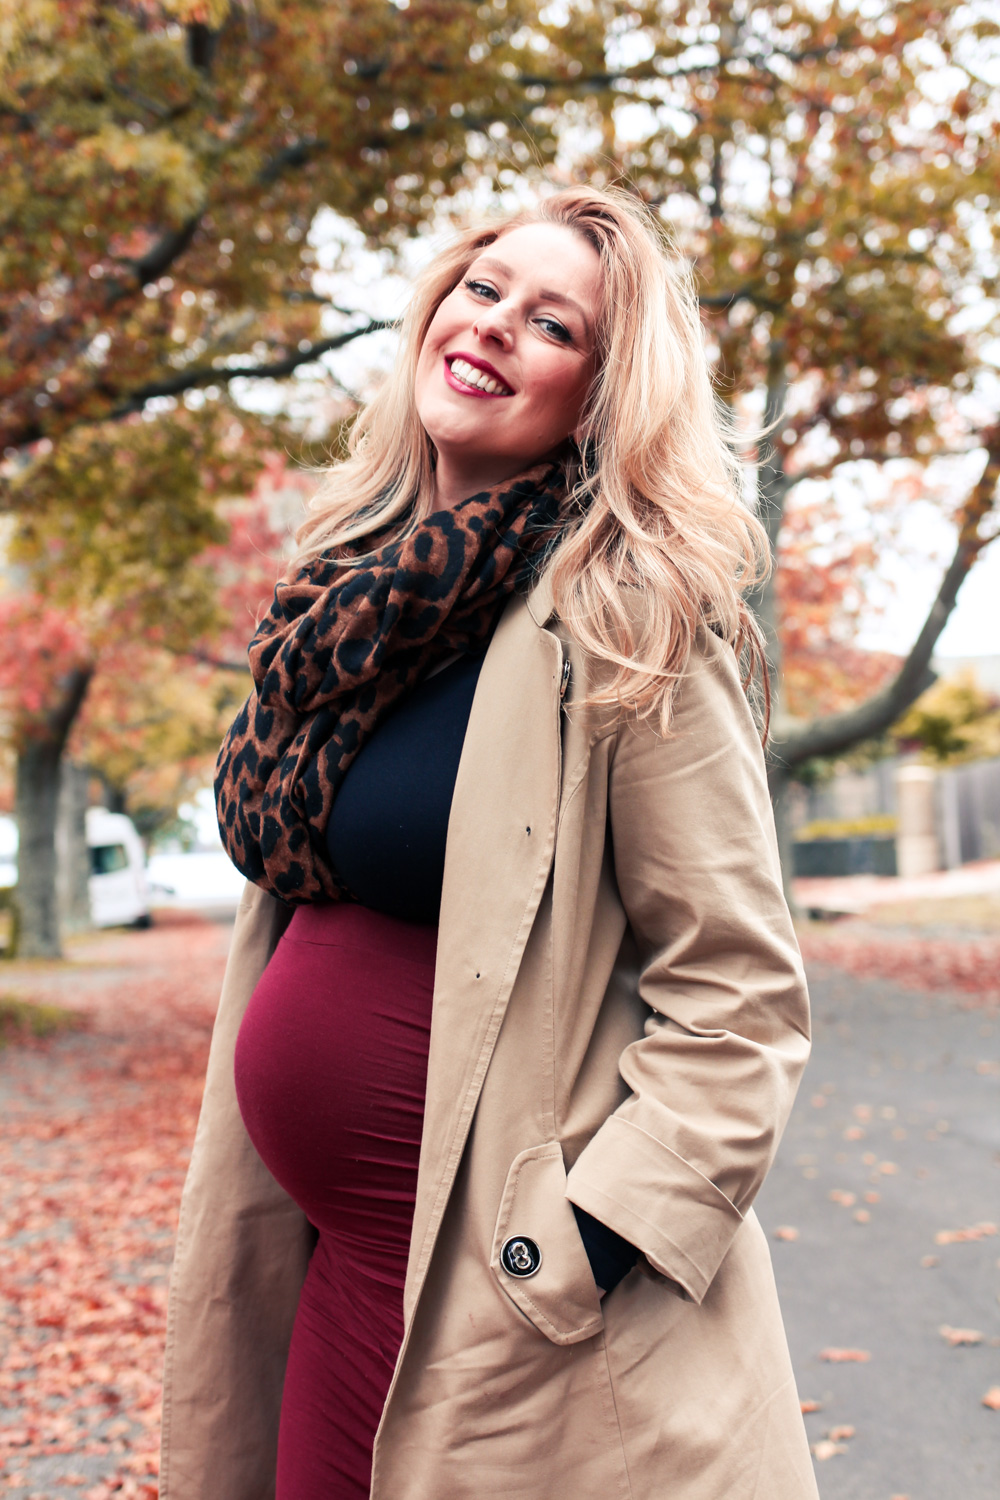 Visit the Goldfields Girl blog for more maternity style